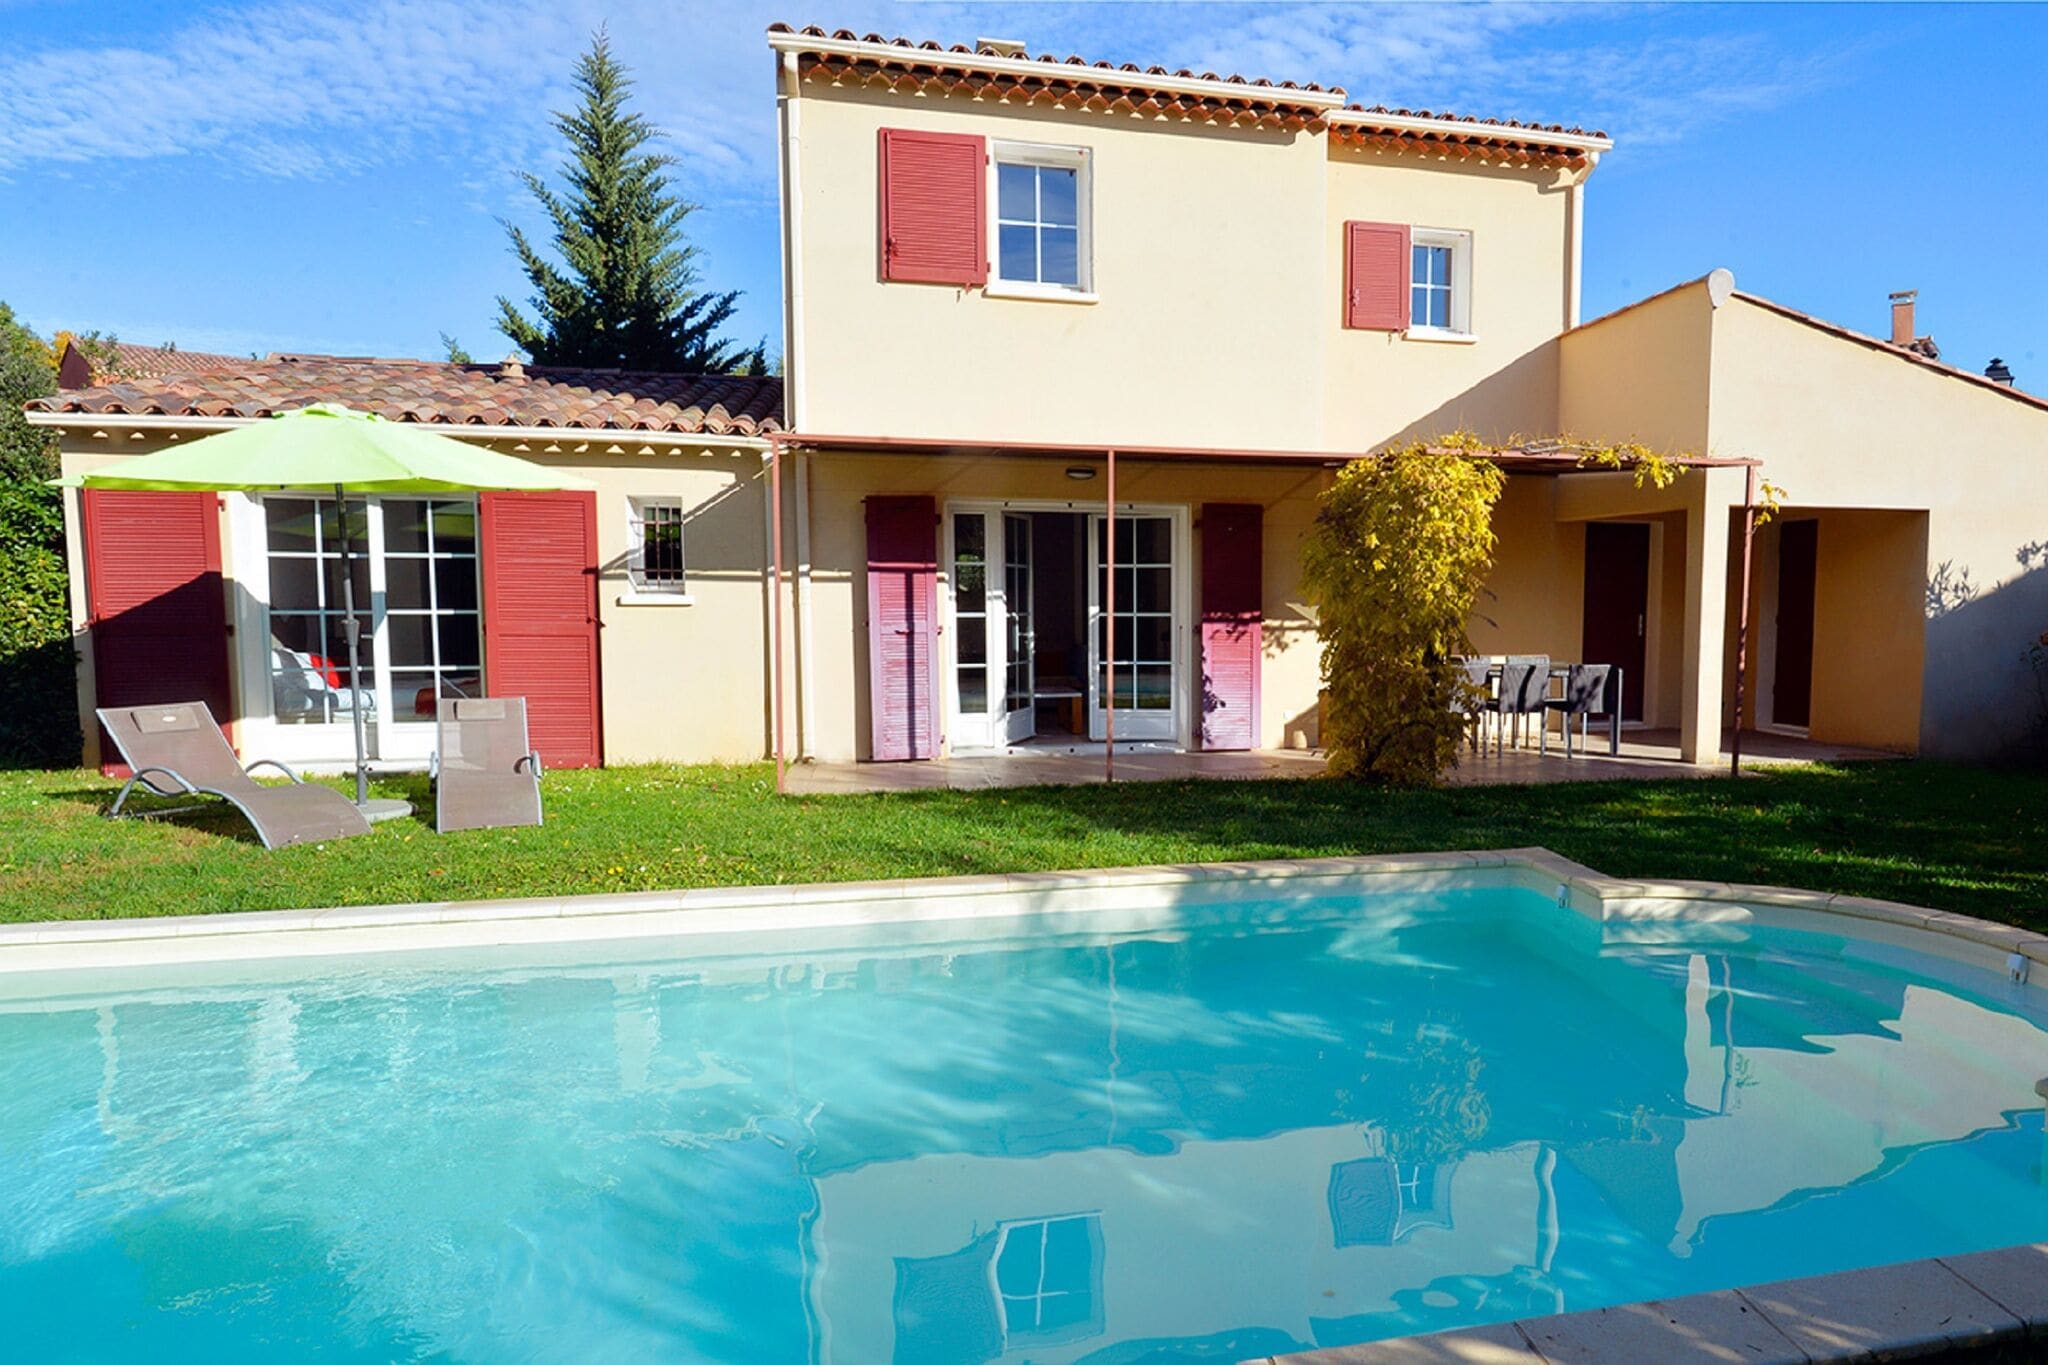 Luxury Provencal villa with AC, located in charming Lubéron